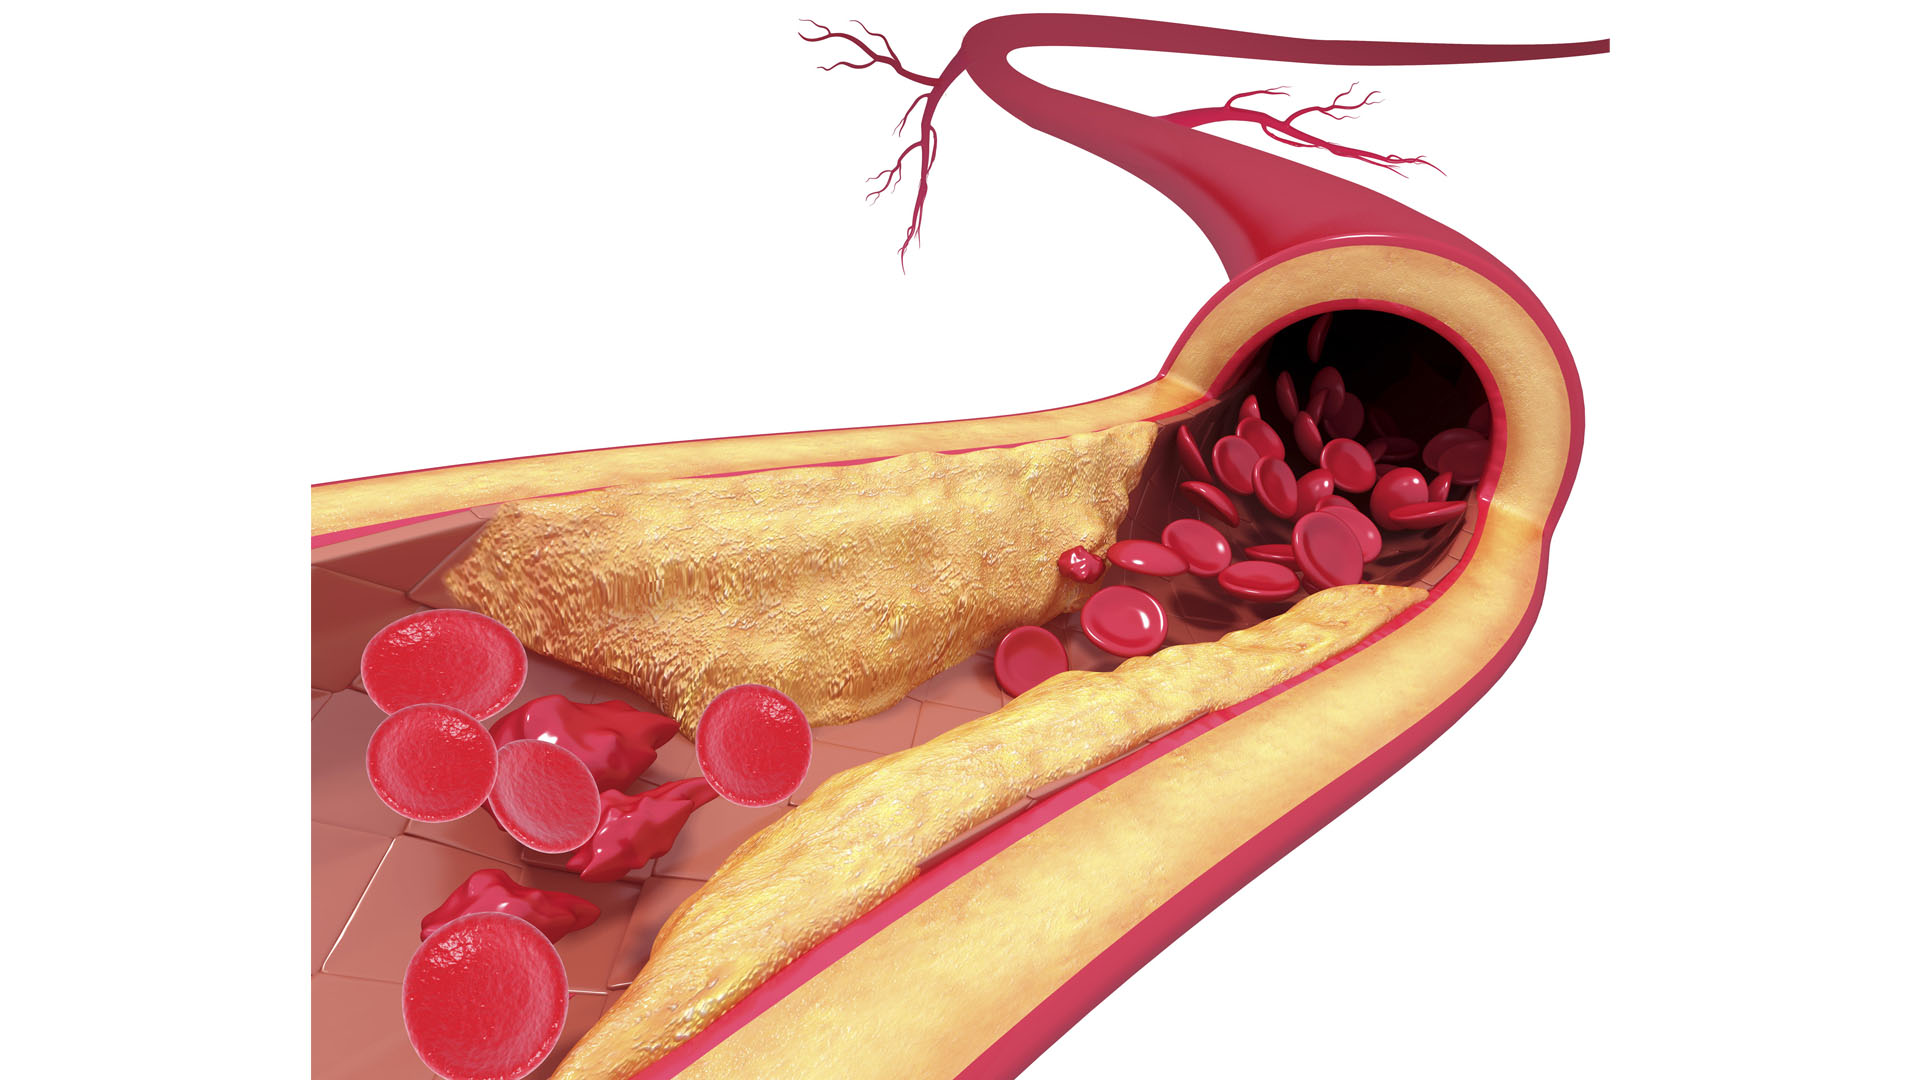 Mortality Predictors Associated with Extreme Levels of 'Bad' Cholesterol